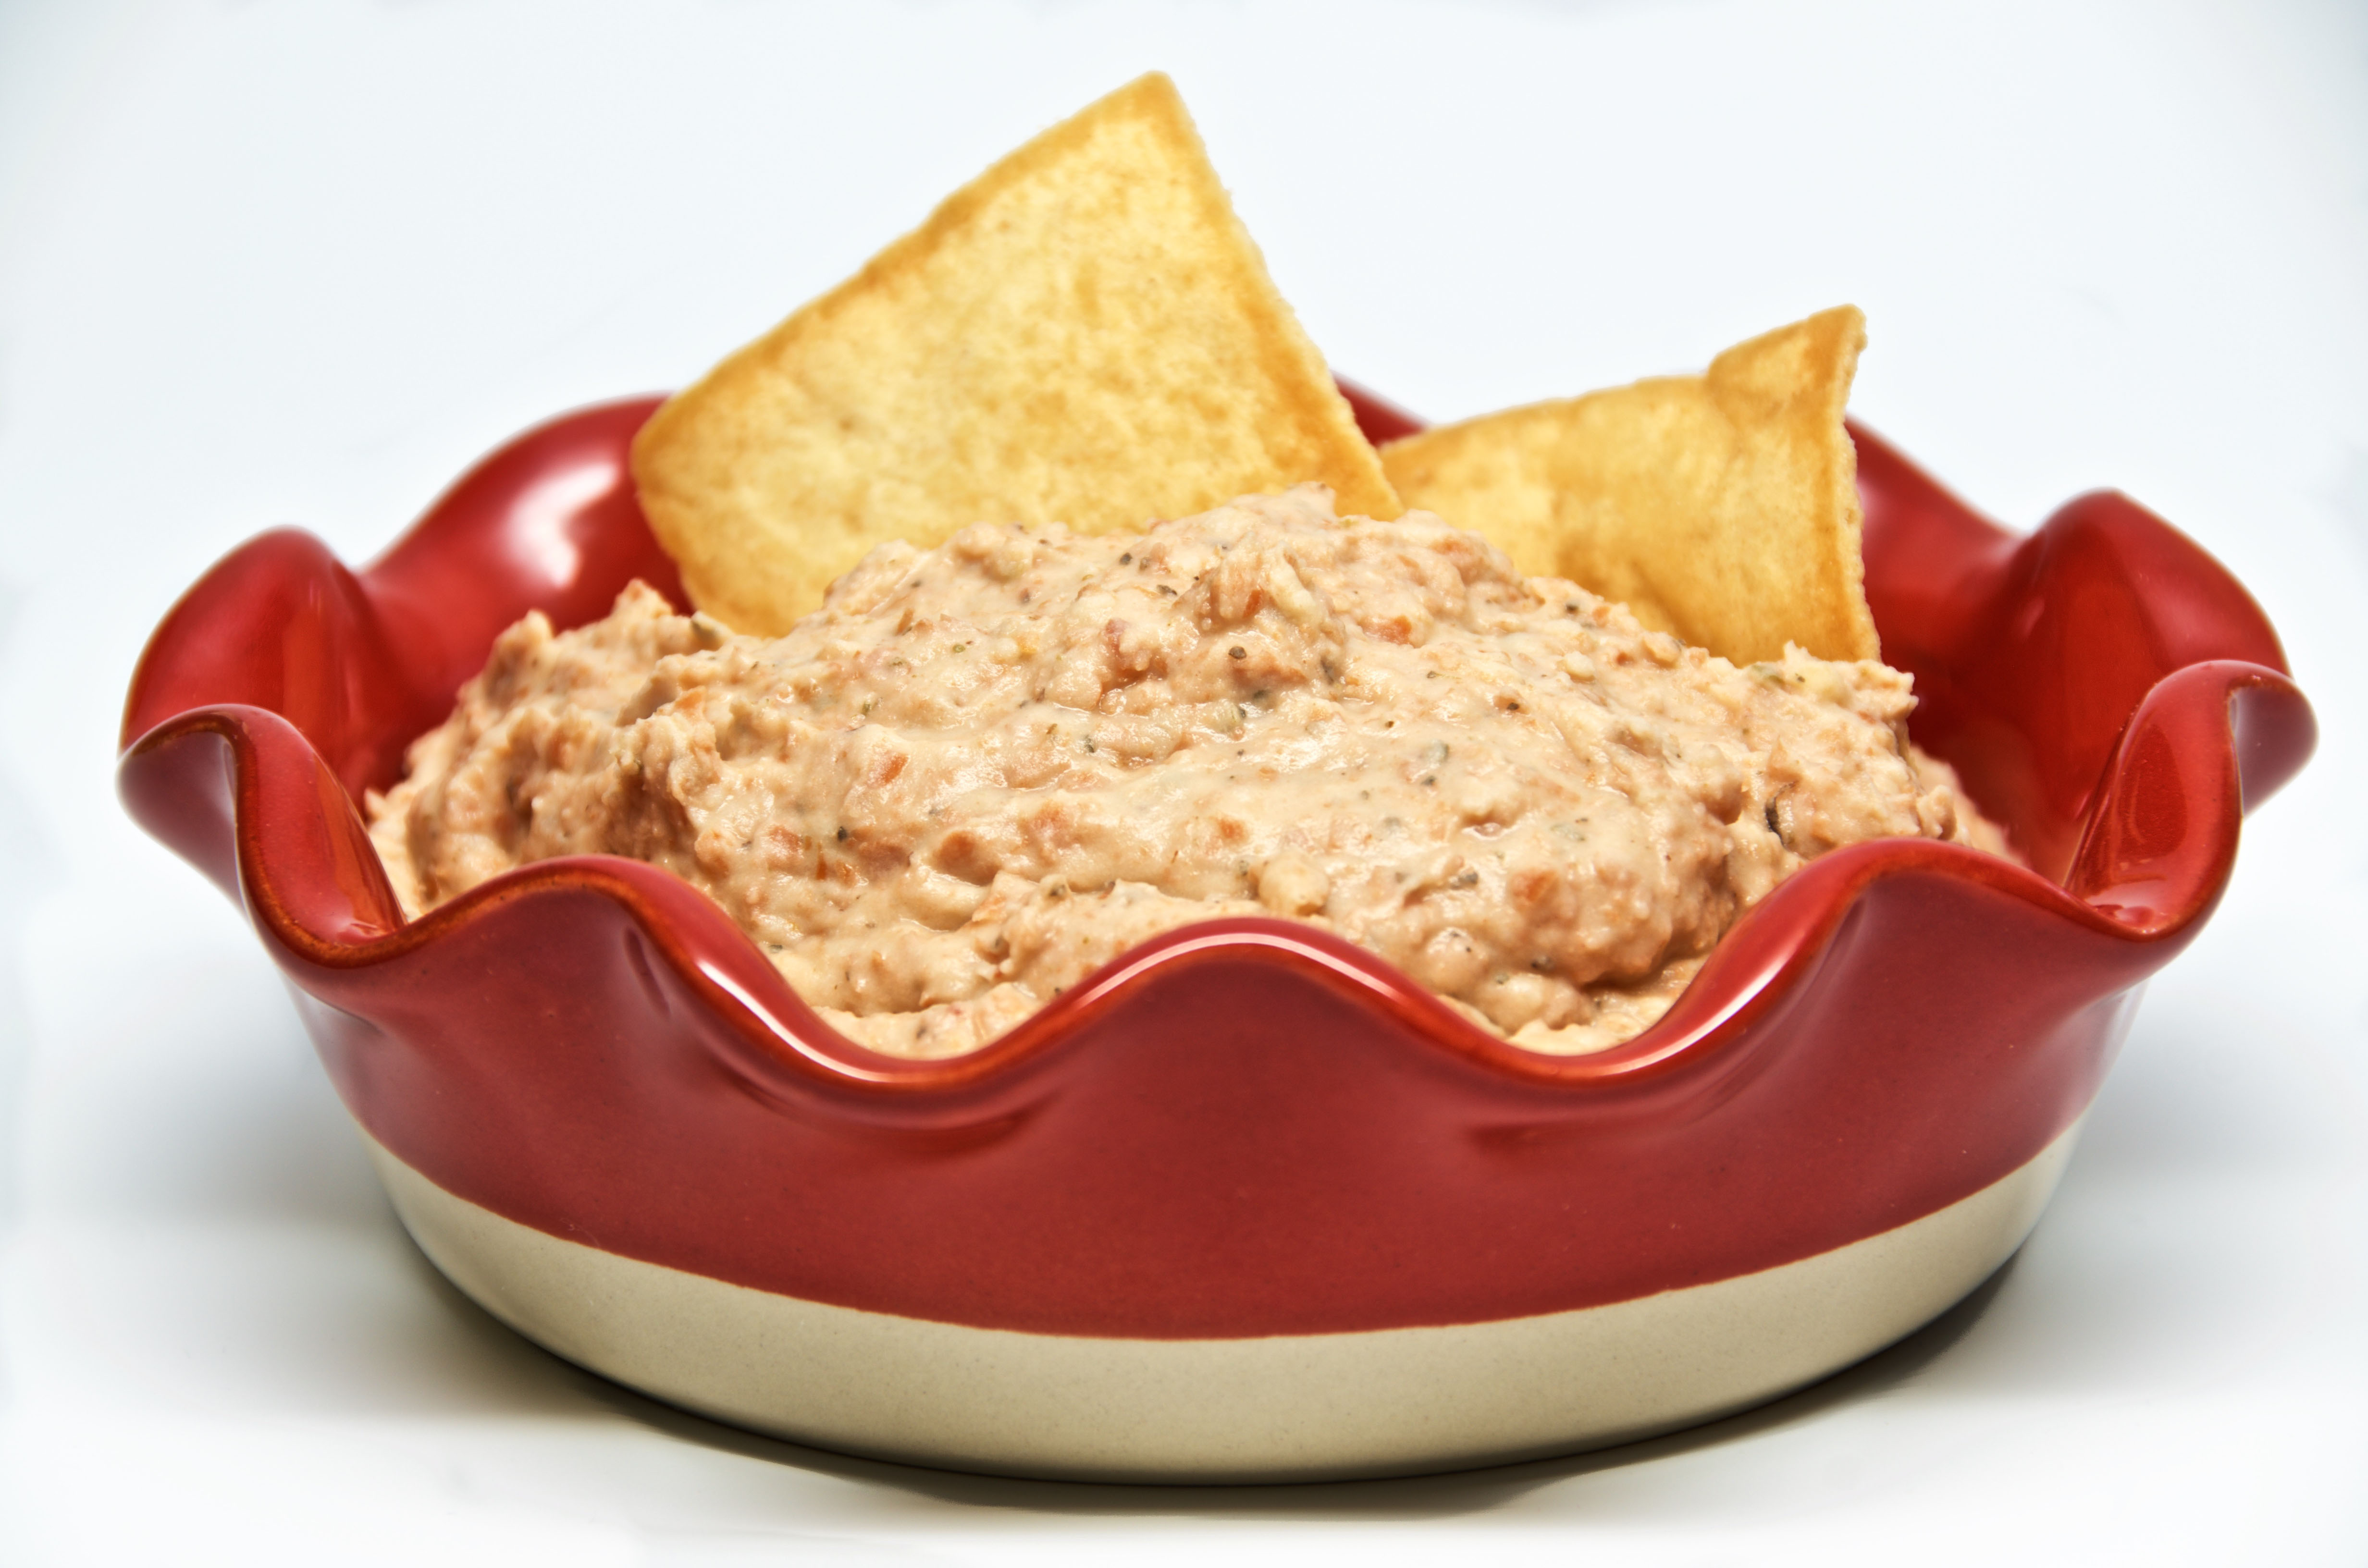 An image of the Pinto Bean Hummus recipe brought to you by the Bean Institute